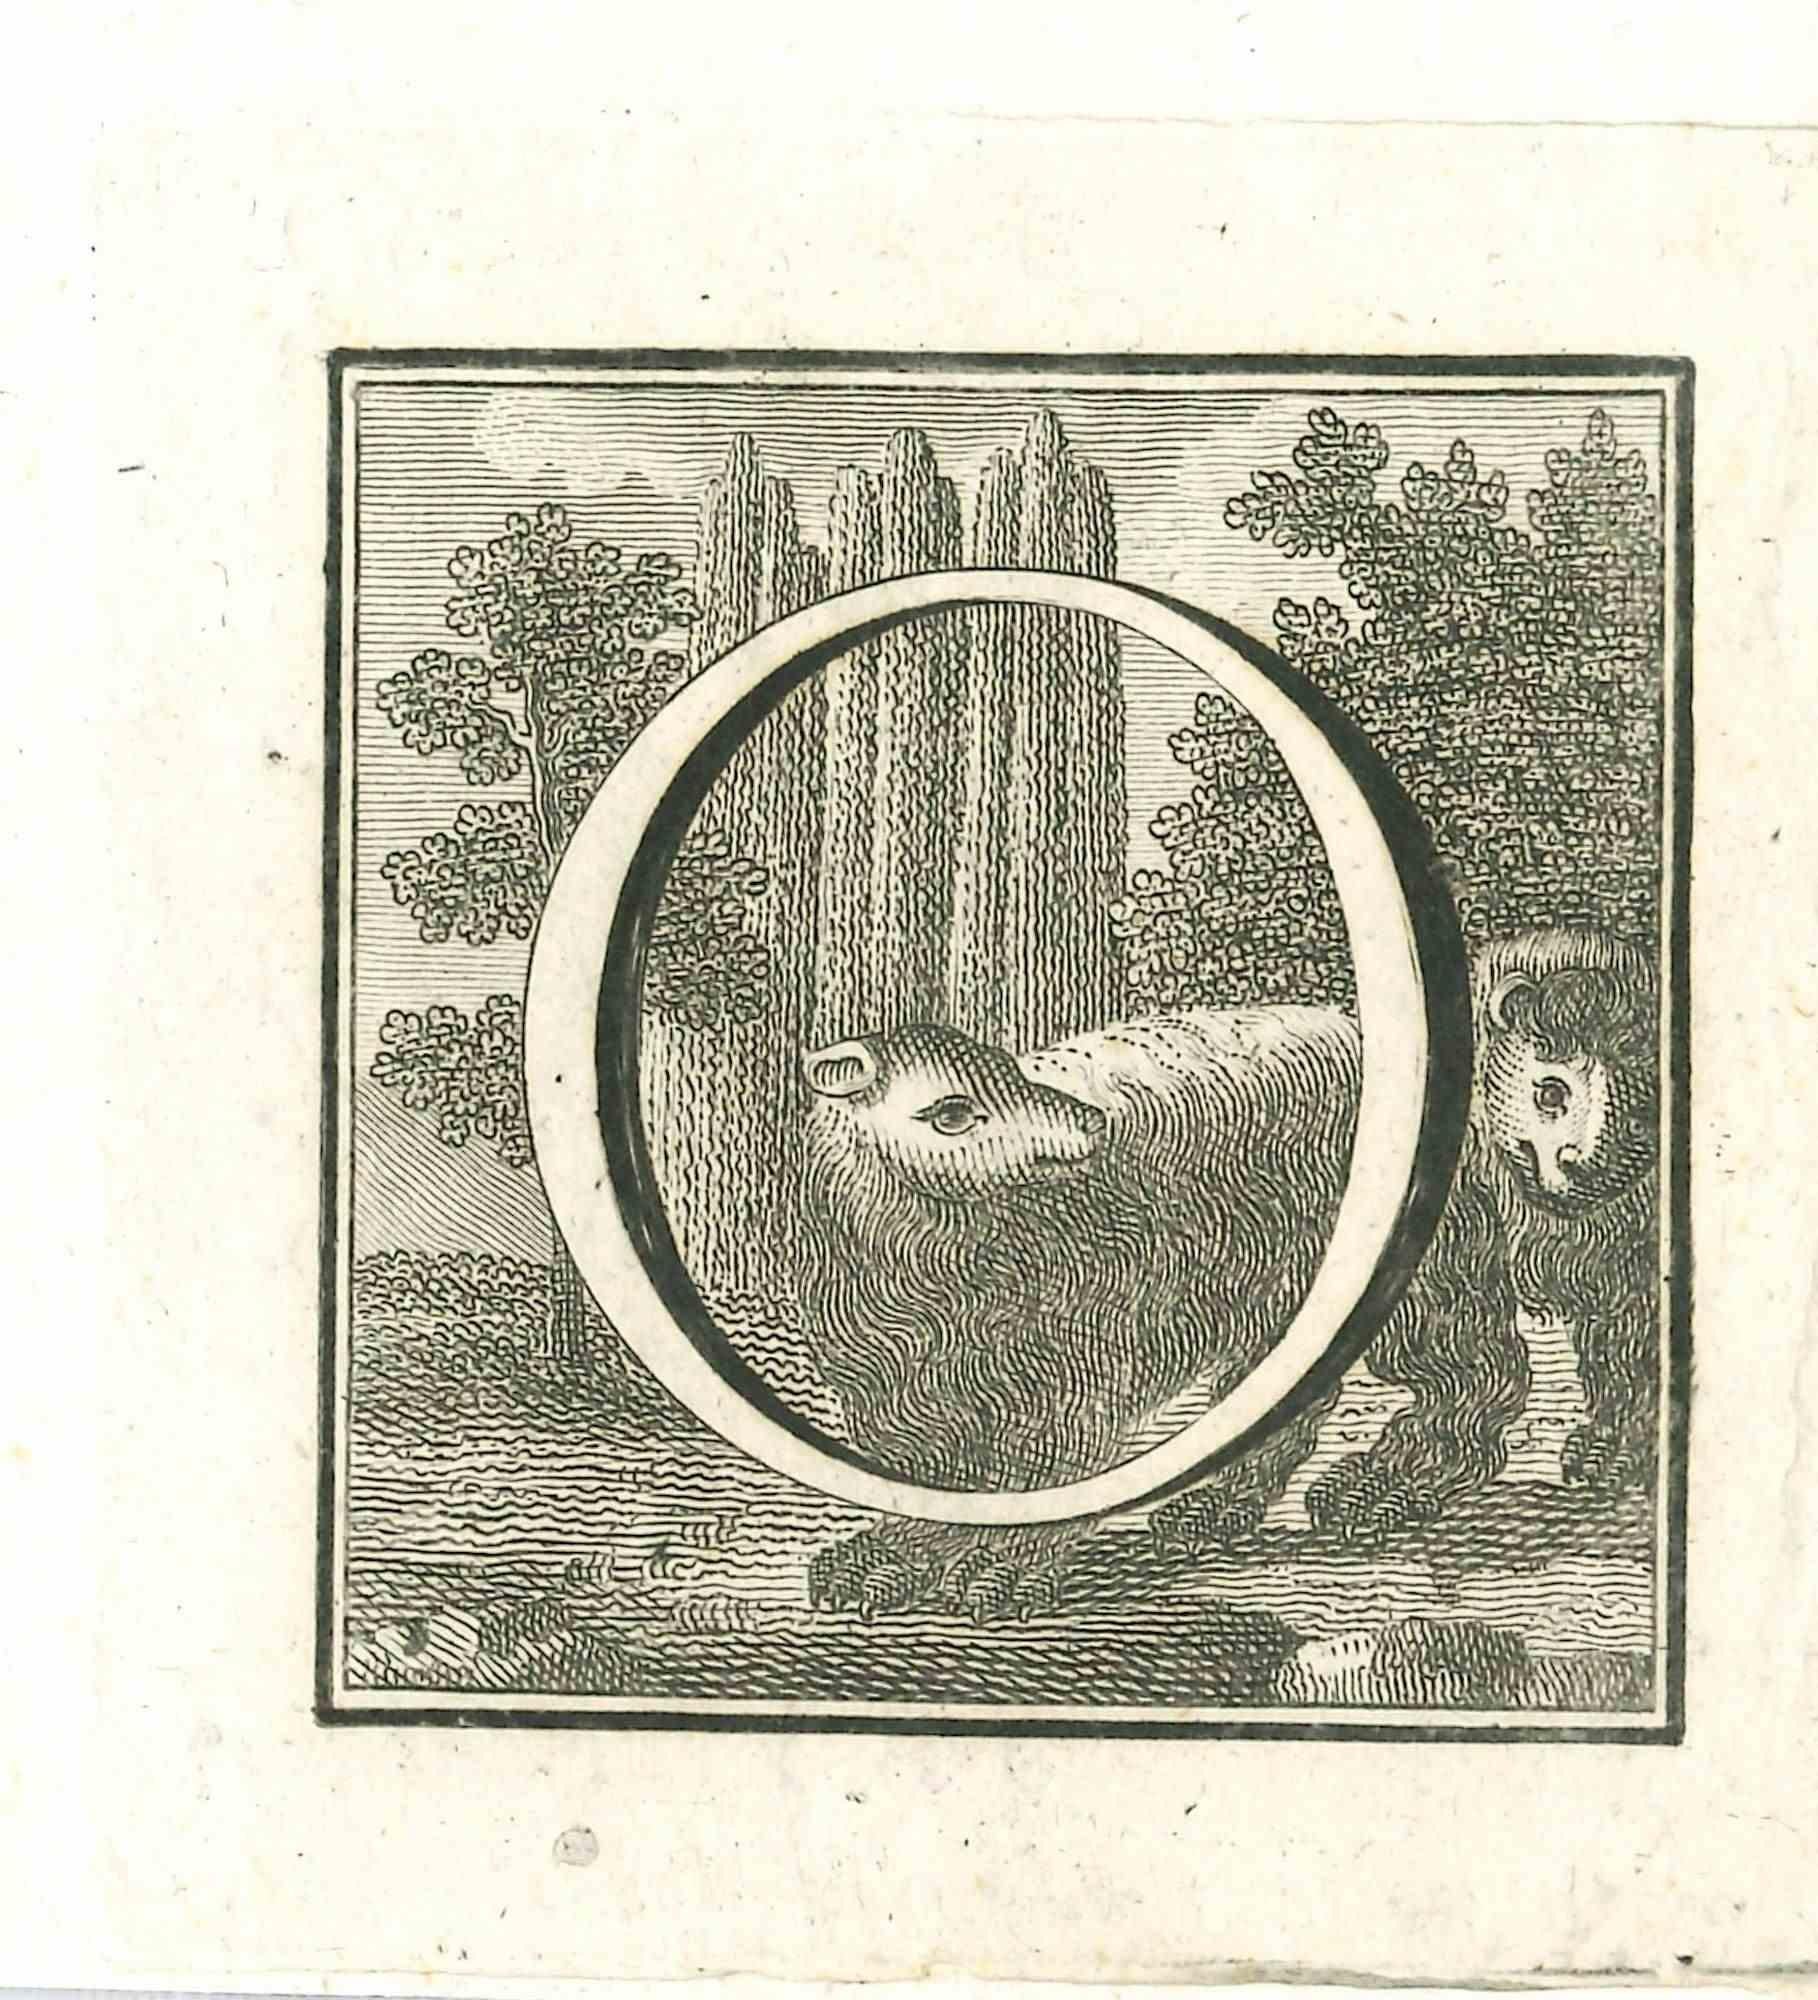 Unknown Figurative Print - Capital Letter O for the Antiquities of Herculaneum Exposed-Etching-18th Century